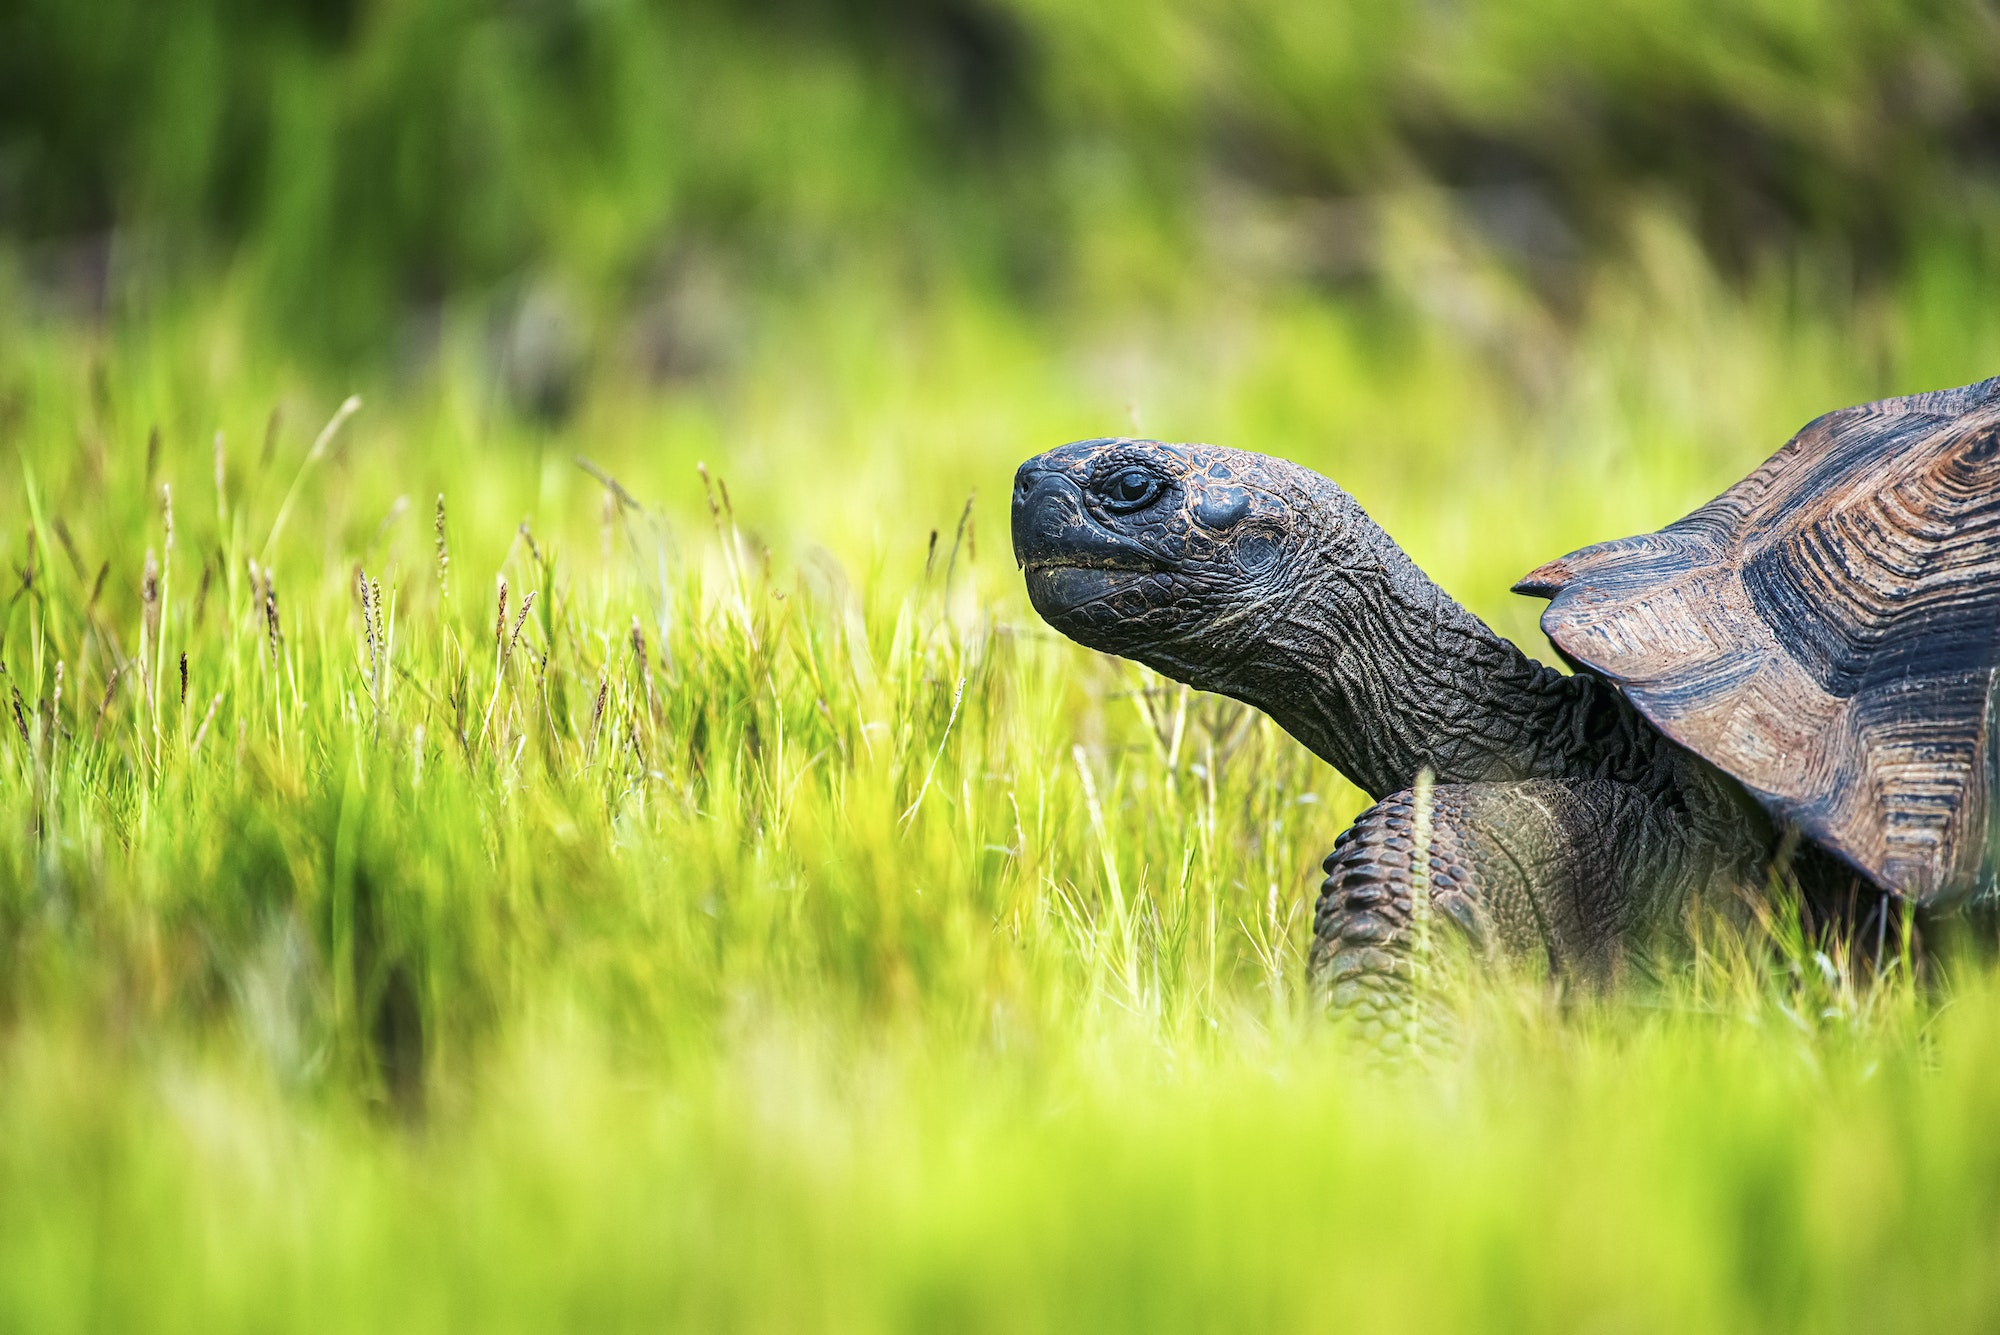 A Galapagos Tortoise walking through grass, side view of the head and part of the shell.